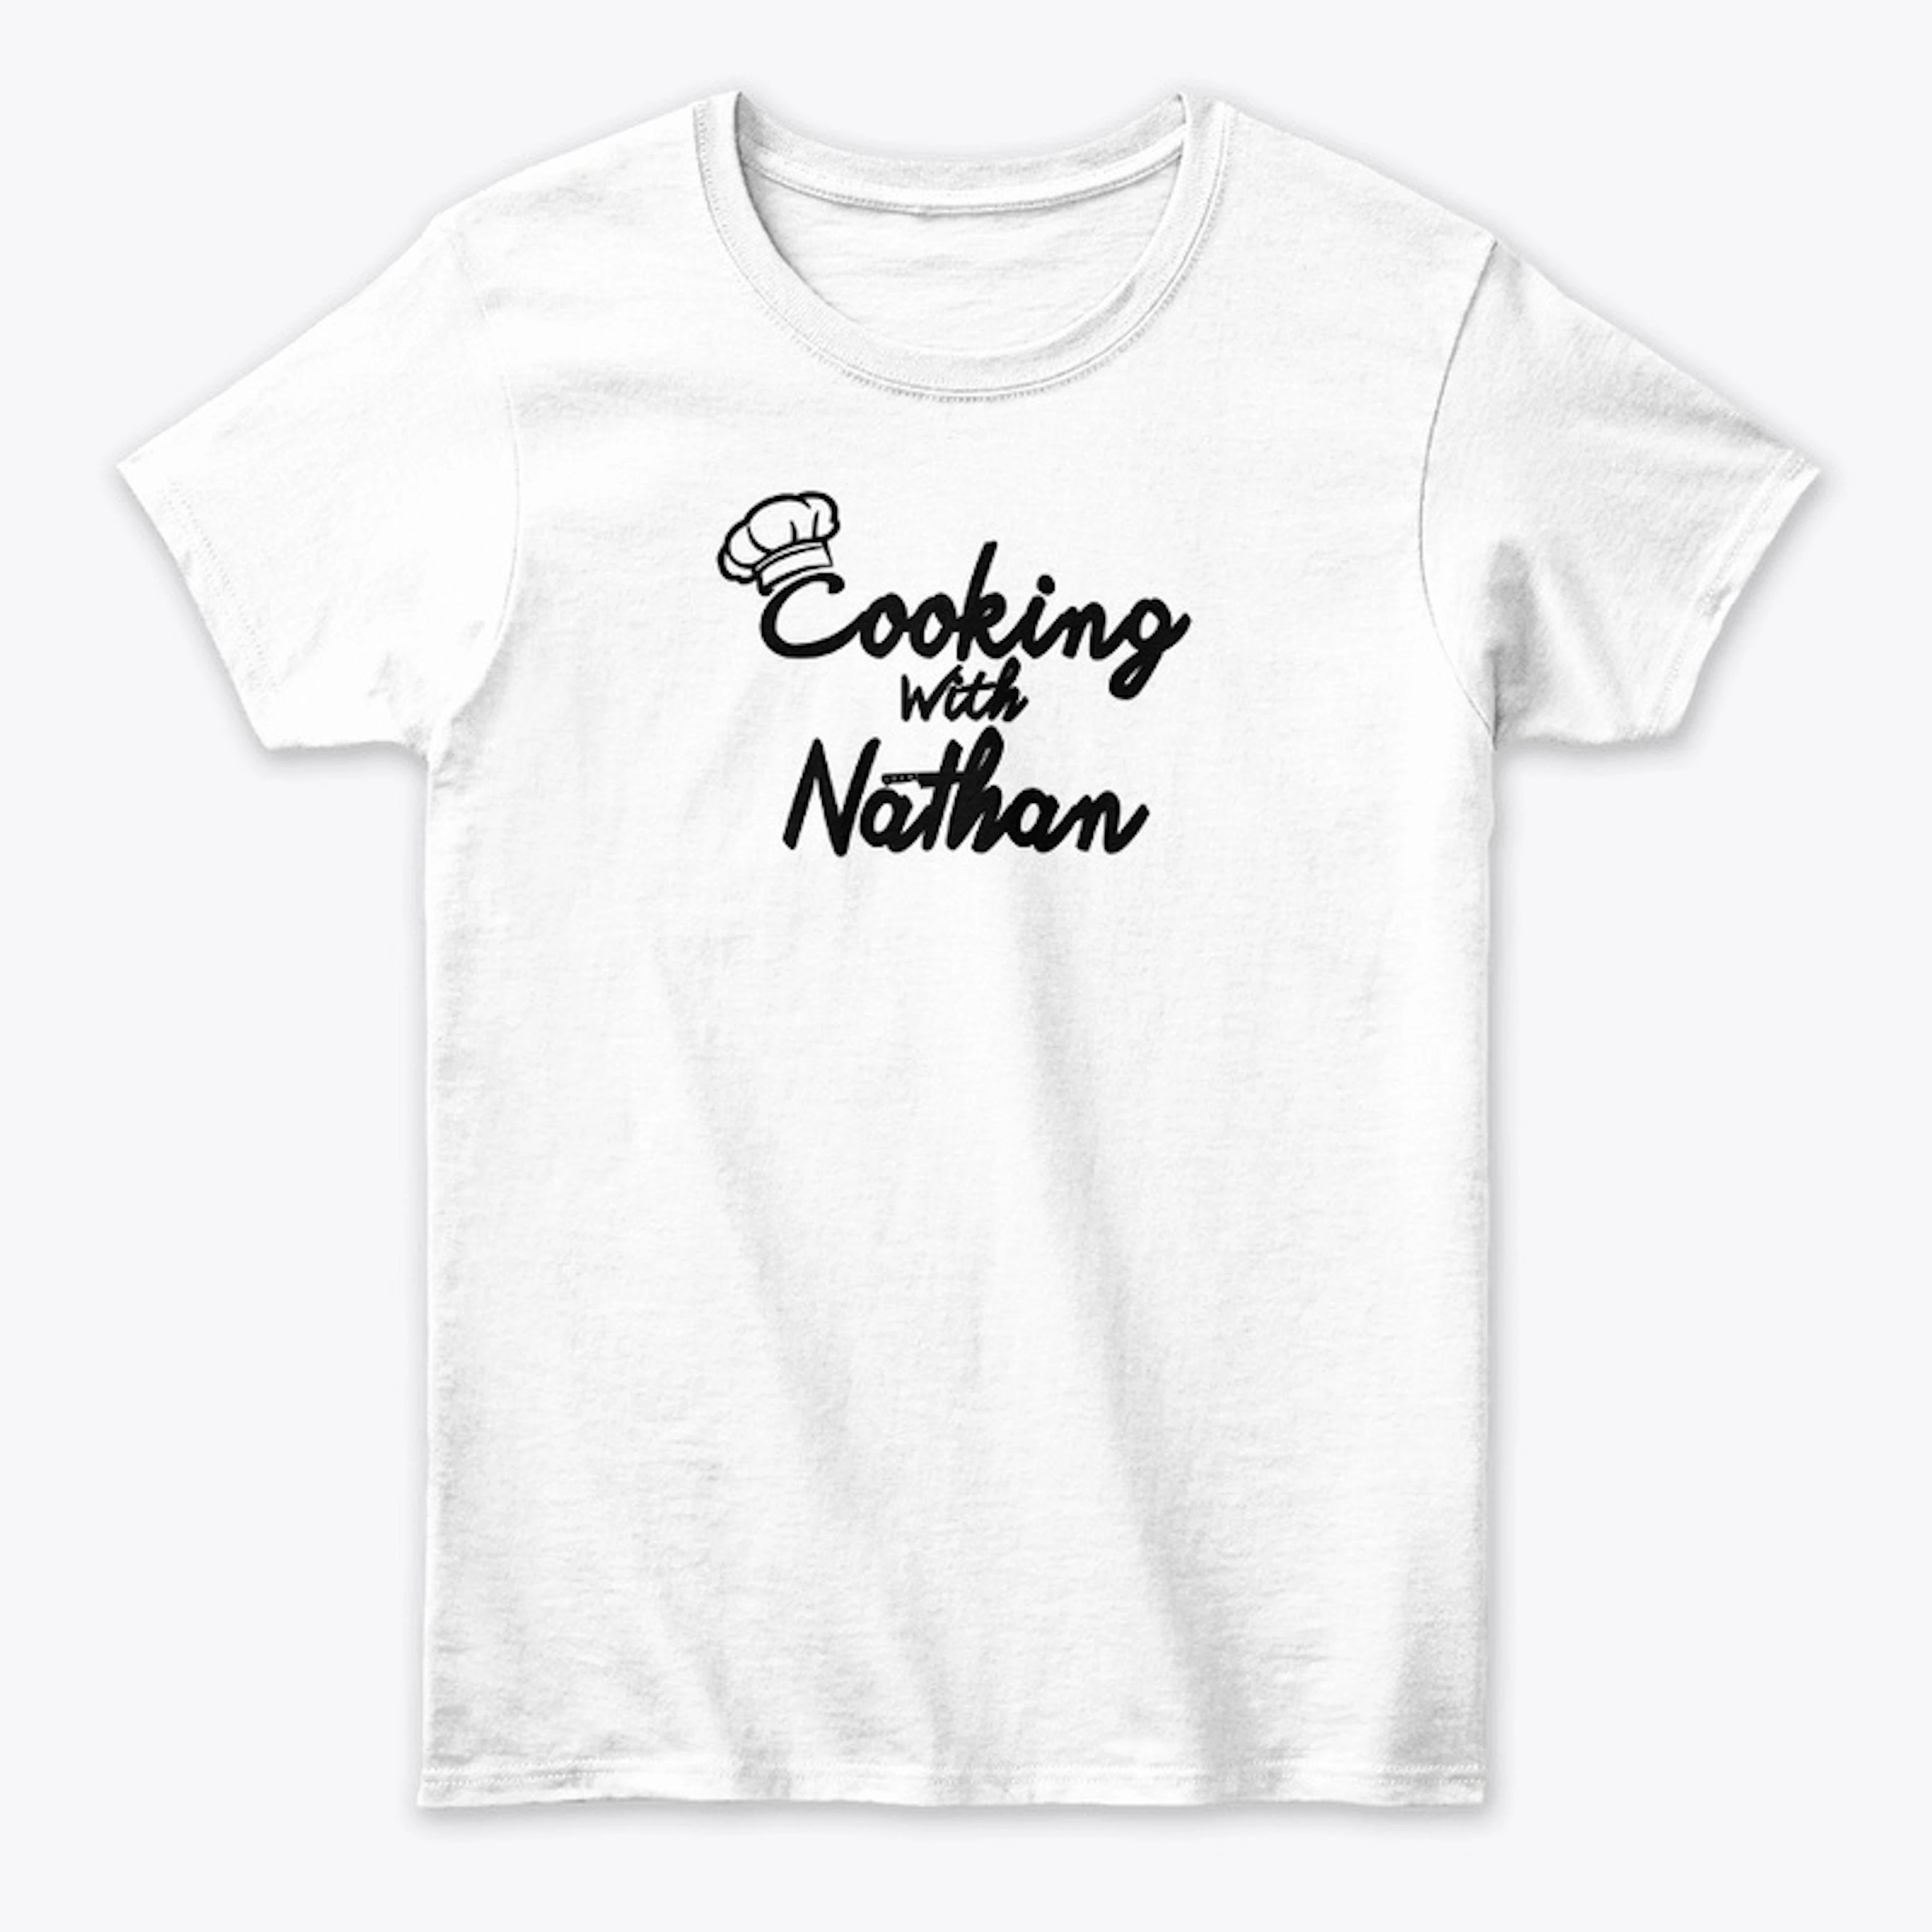 Cooking with Nathan black design